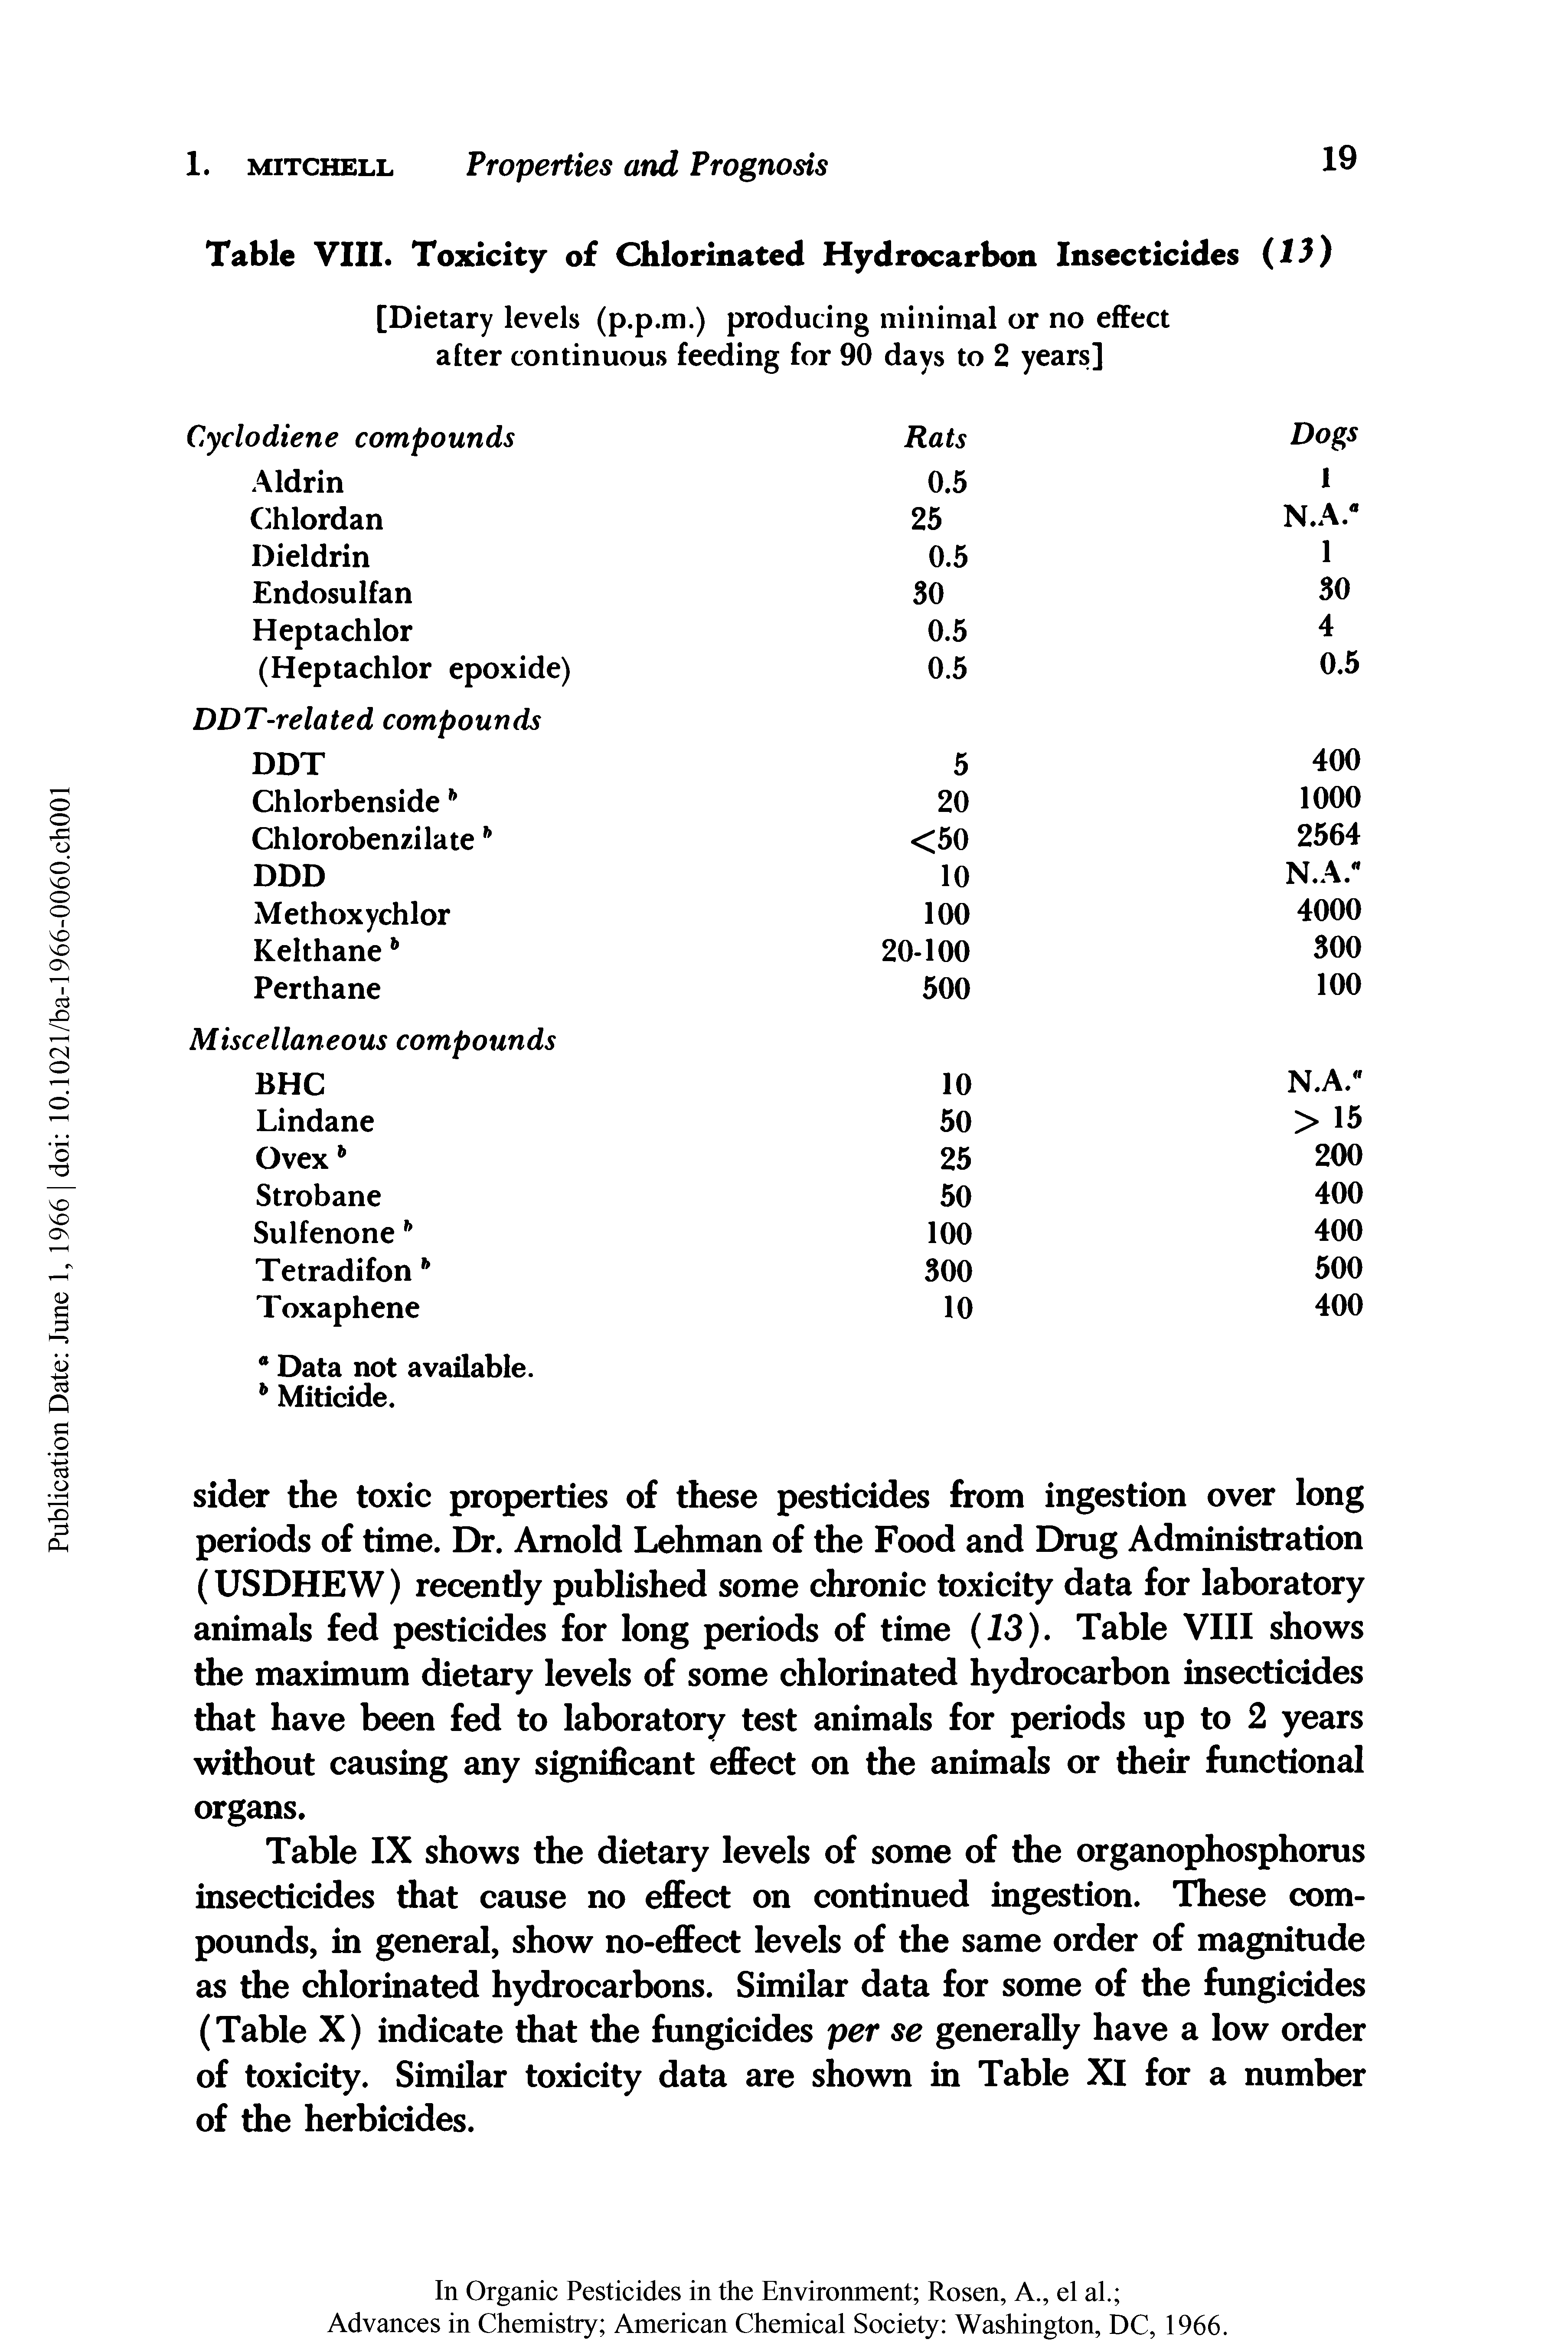 Table IX shows the dietary levels of some of the organophosphorus insecticides that cause no effect on continued ingestion. These compounds, in general, show no-effect levels of the same order of magnitude as the chlorinated hydrocarbons. Similar data for some of the fungicides (Table X) indicate that the fungicides per se generally have a low order of toxicity. Similar toxicity data are shown in Table XI for a number of the herbicides.